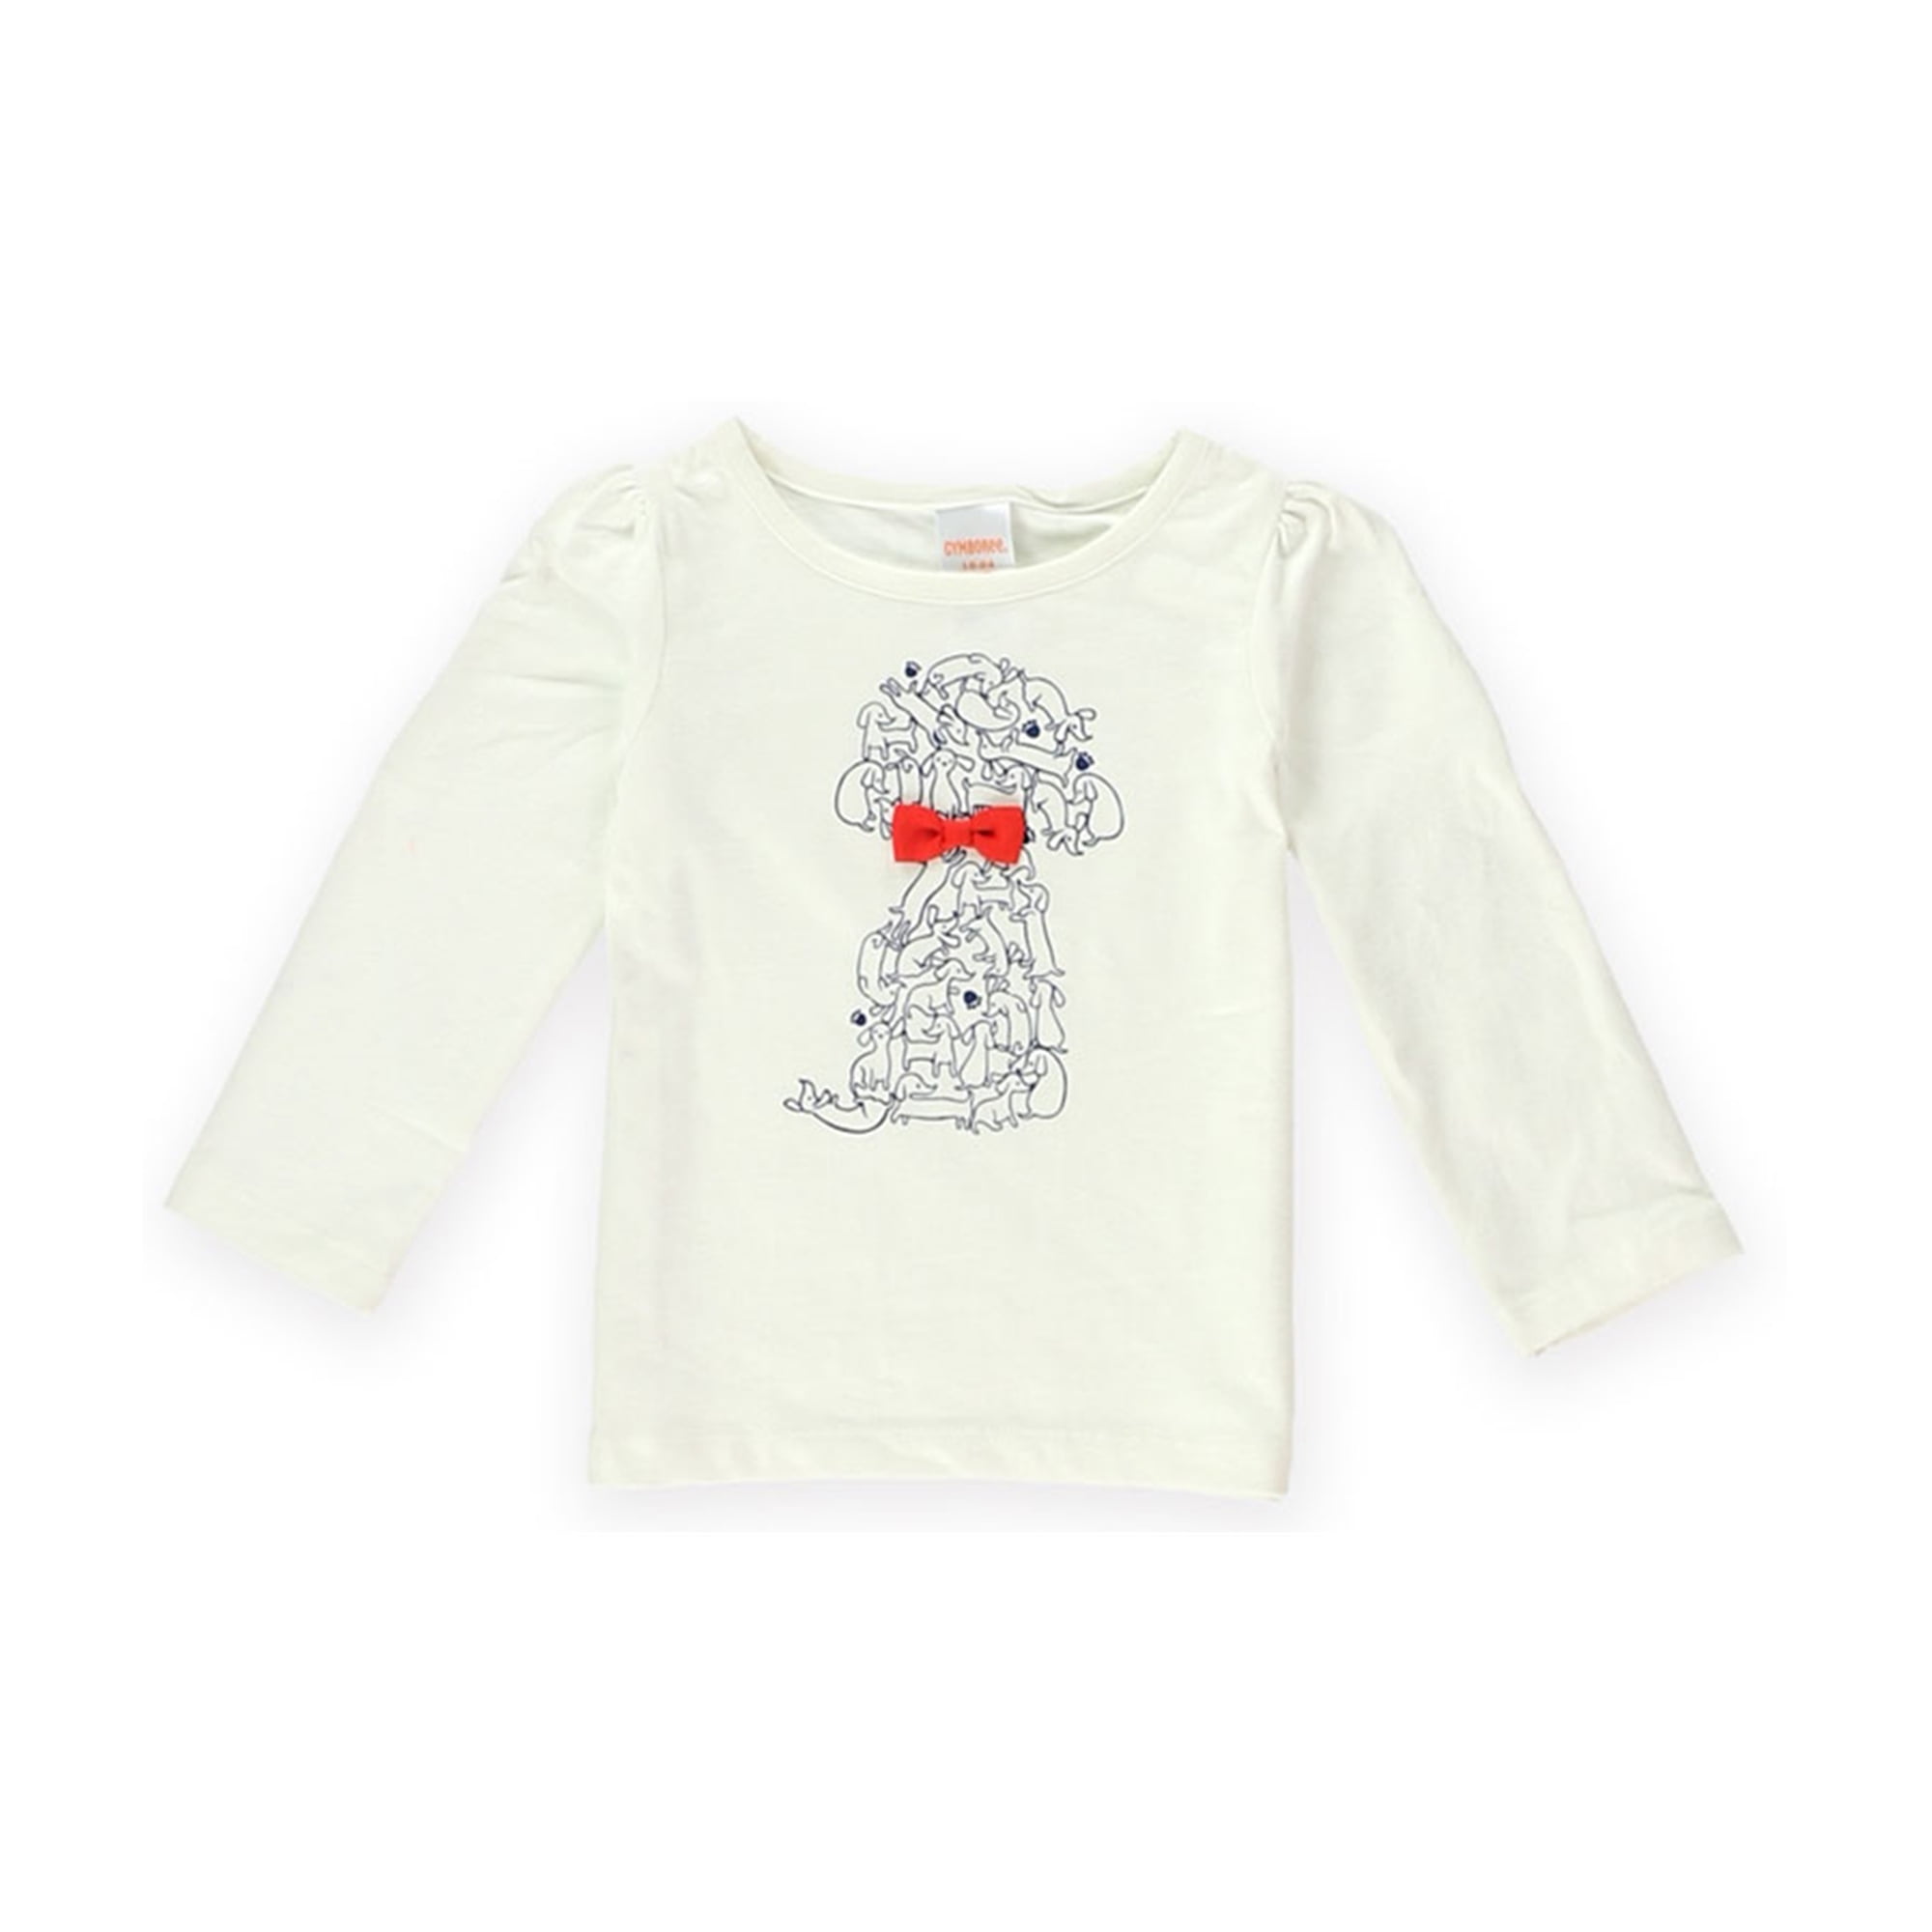 Gymboree The Holiday Shop White Shirt Girl W/ Red Star Size 12-18 Mos & UP NEW 